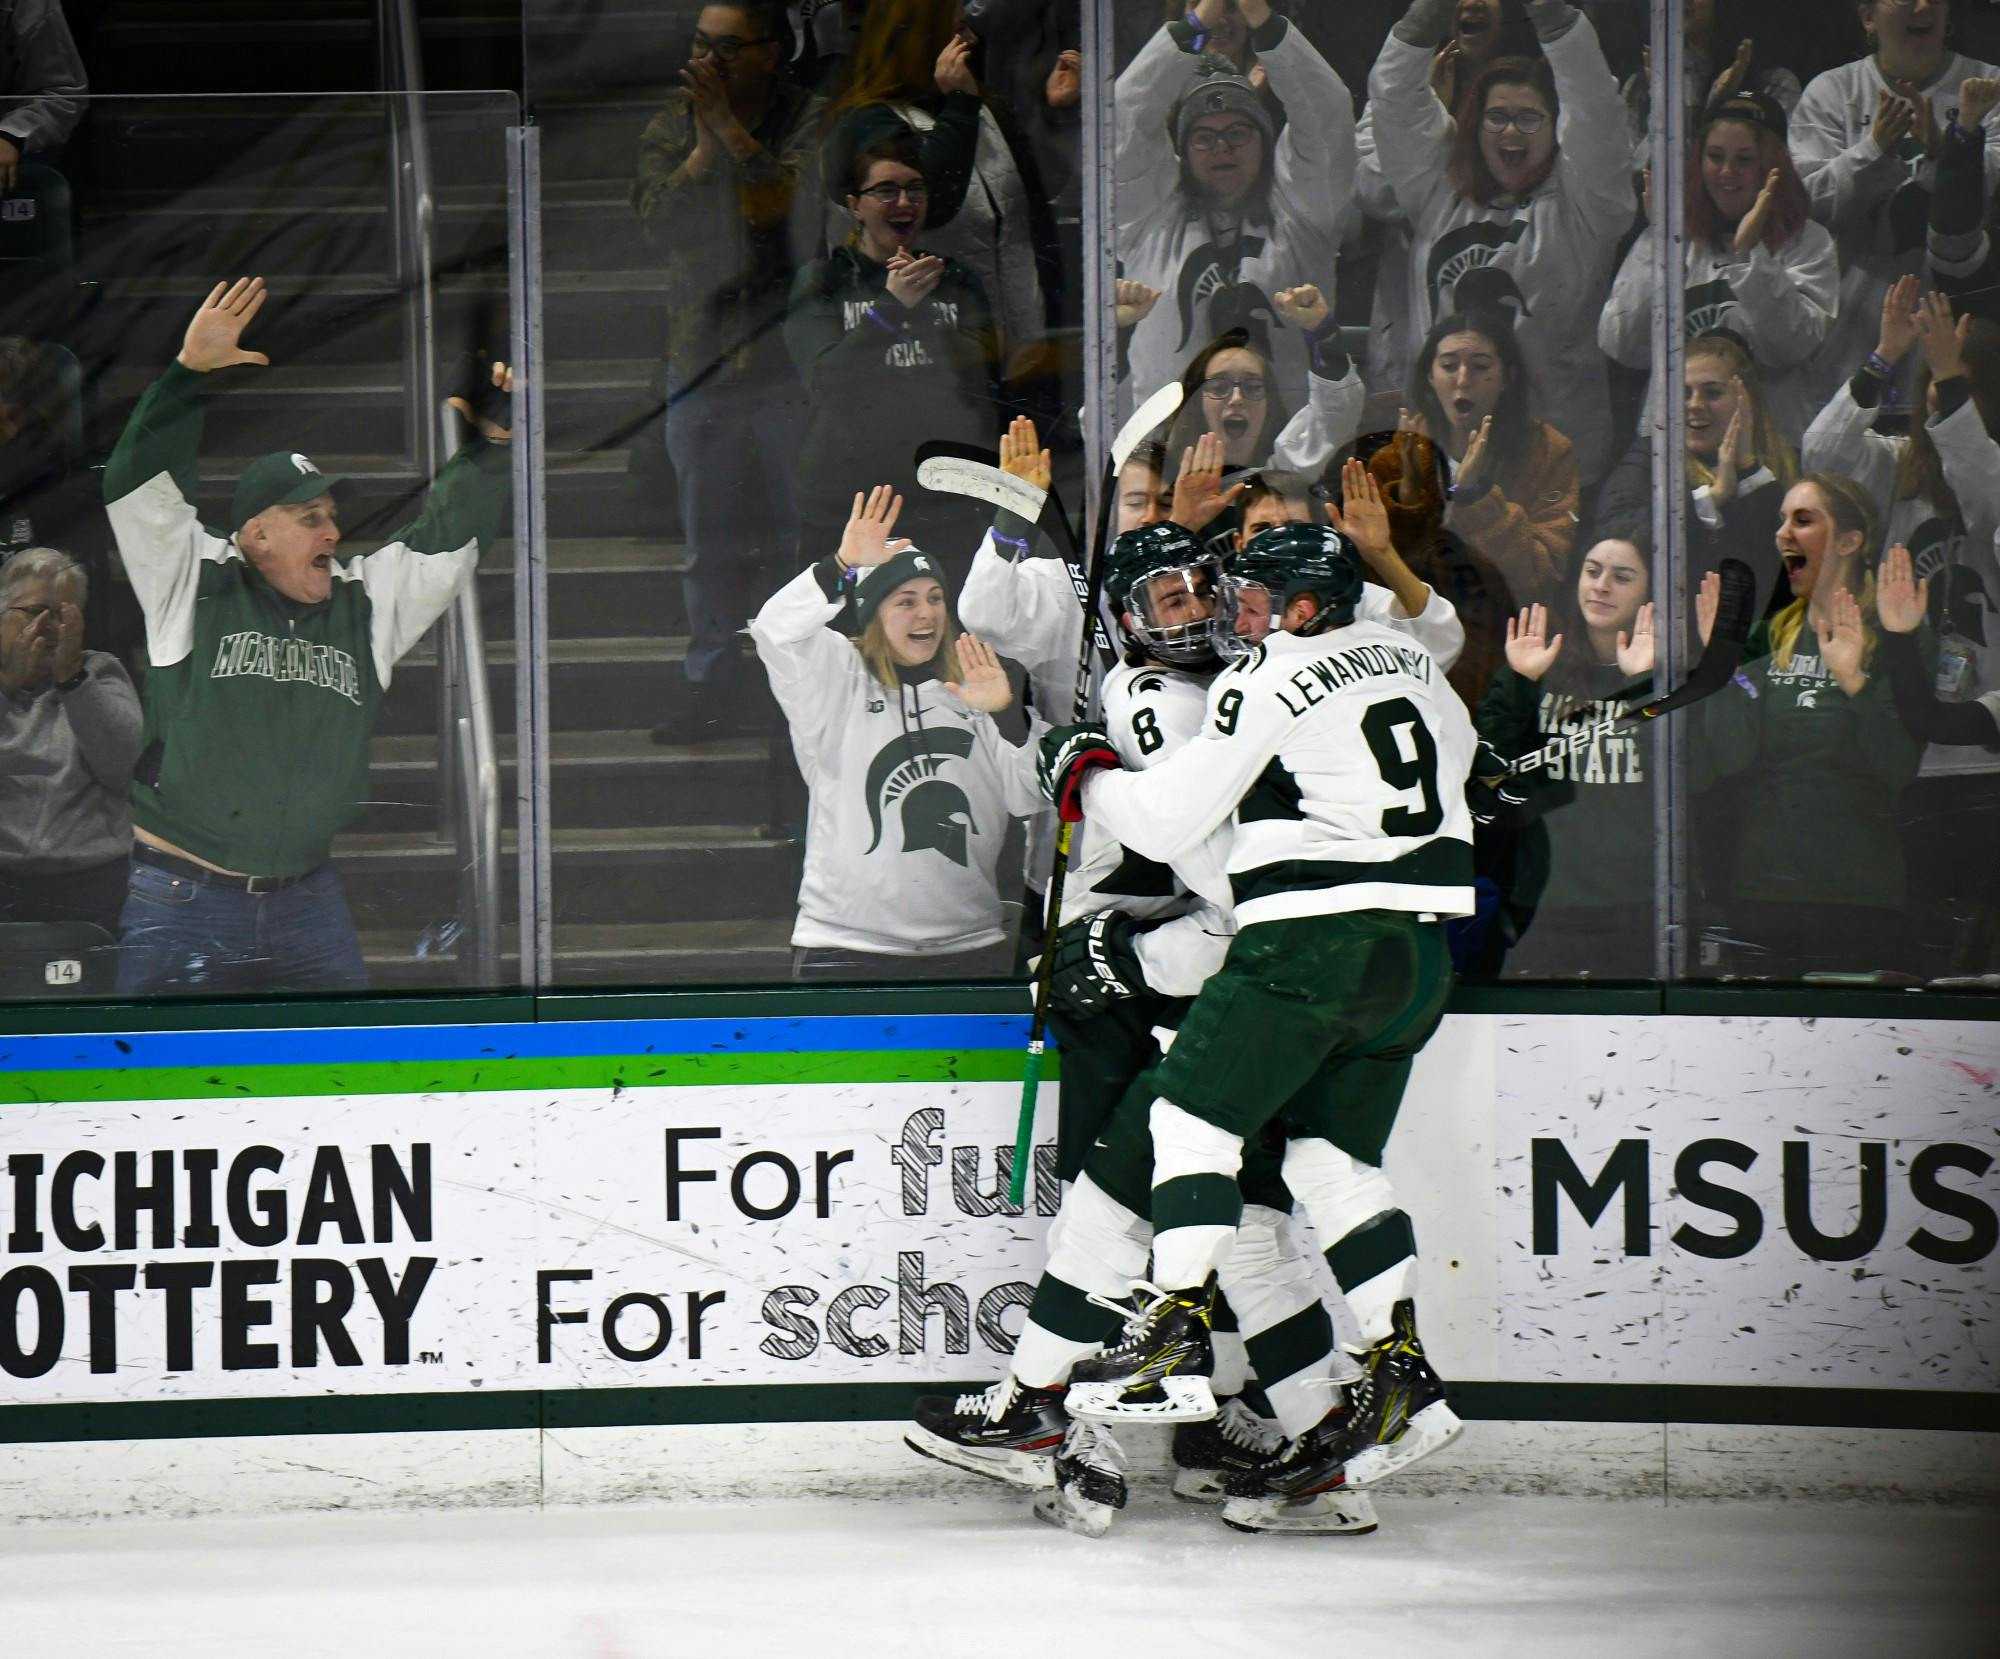 <p>MSU players celebrate another goal during the hockey game against Minnesota at the Munn Ice Arena on Jan. 10. The Spartans defeated the Golden Gophers 4-1. </p>